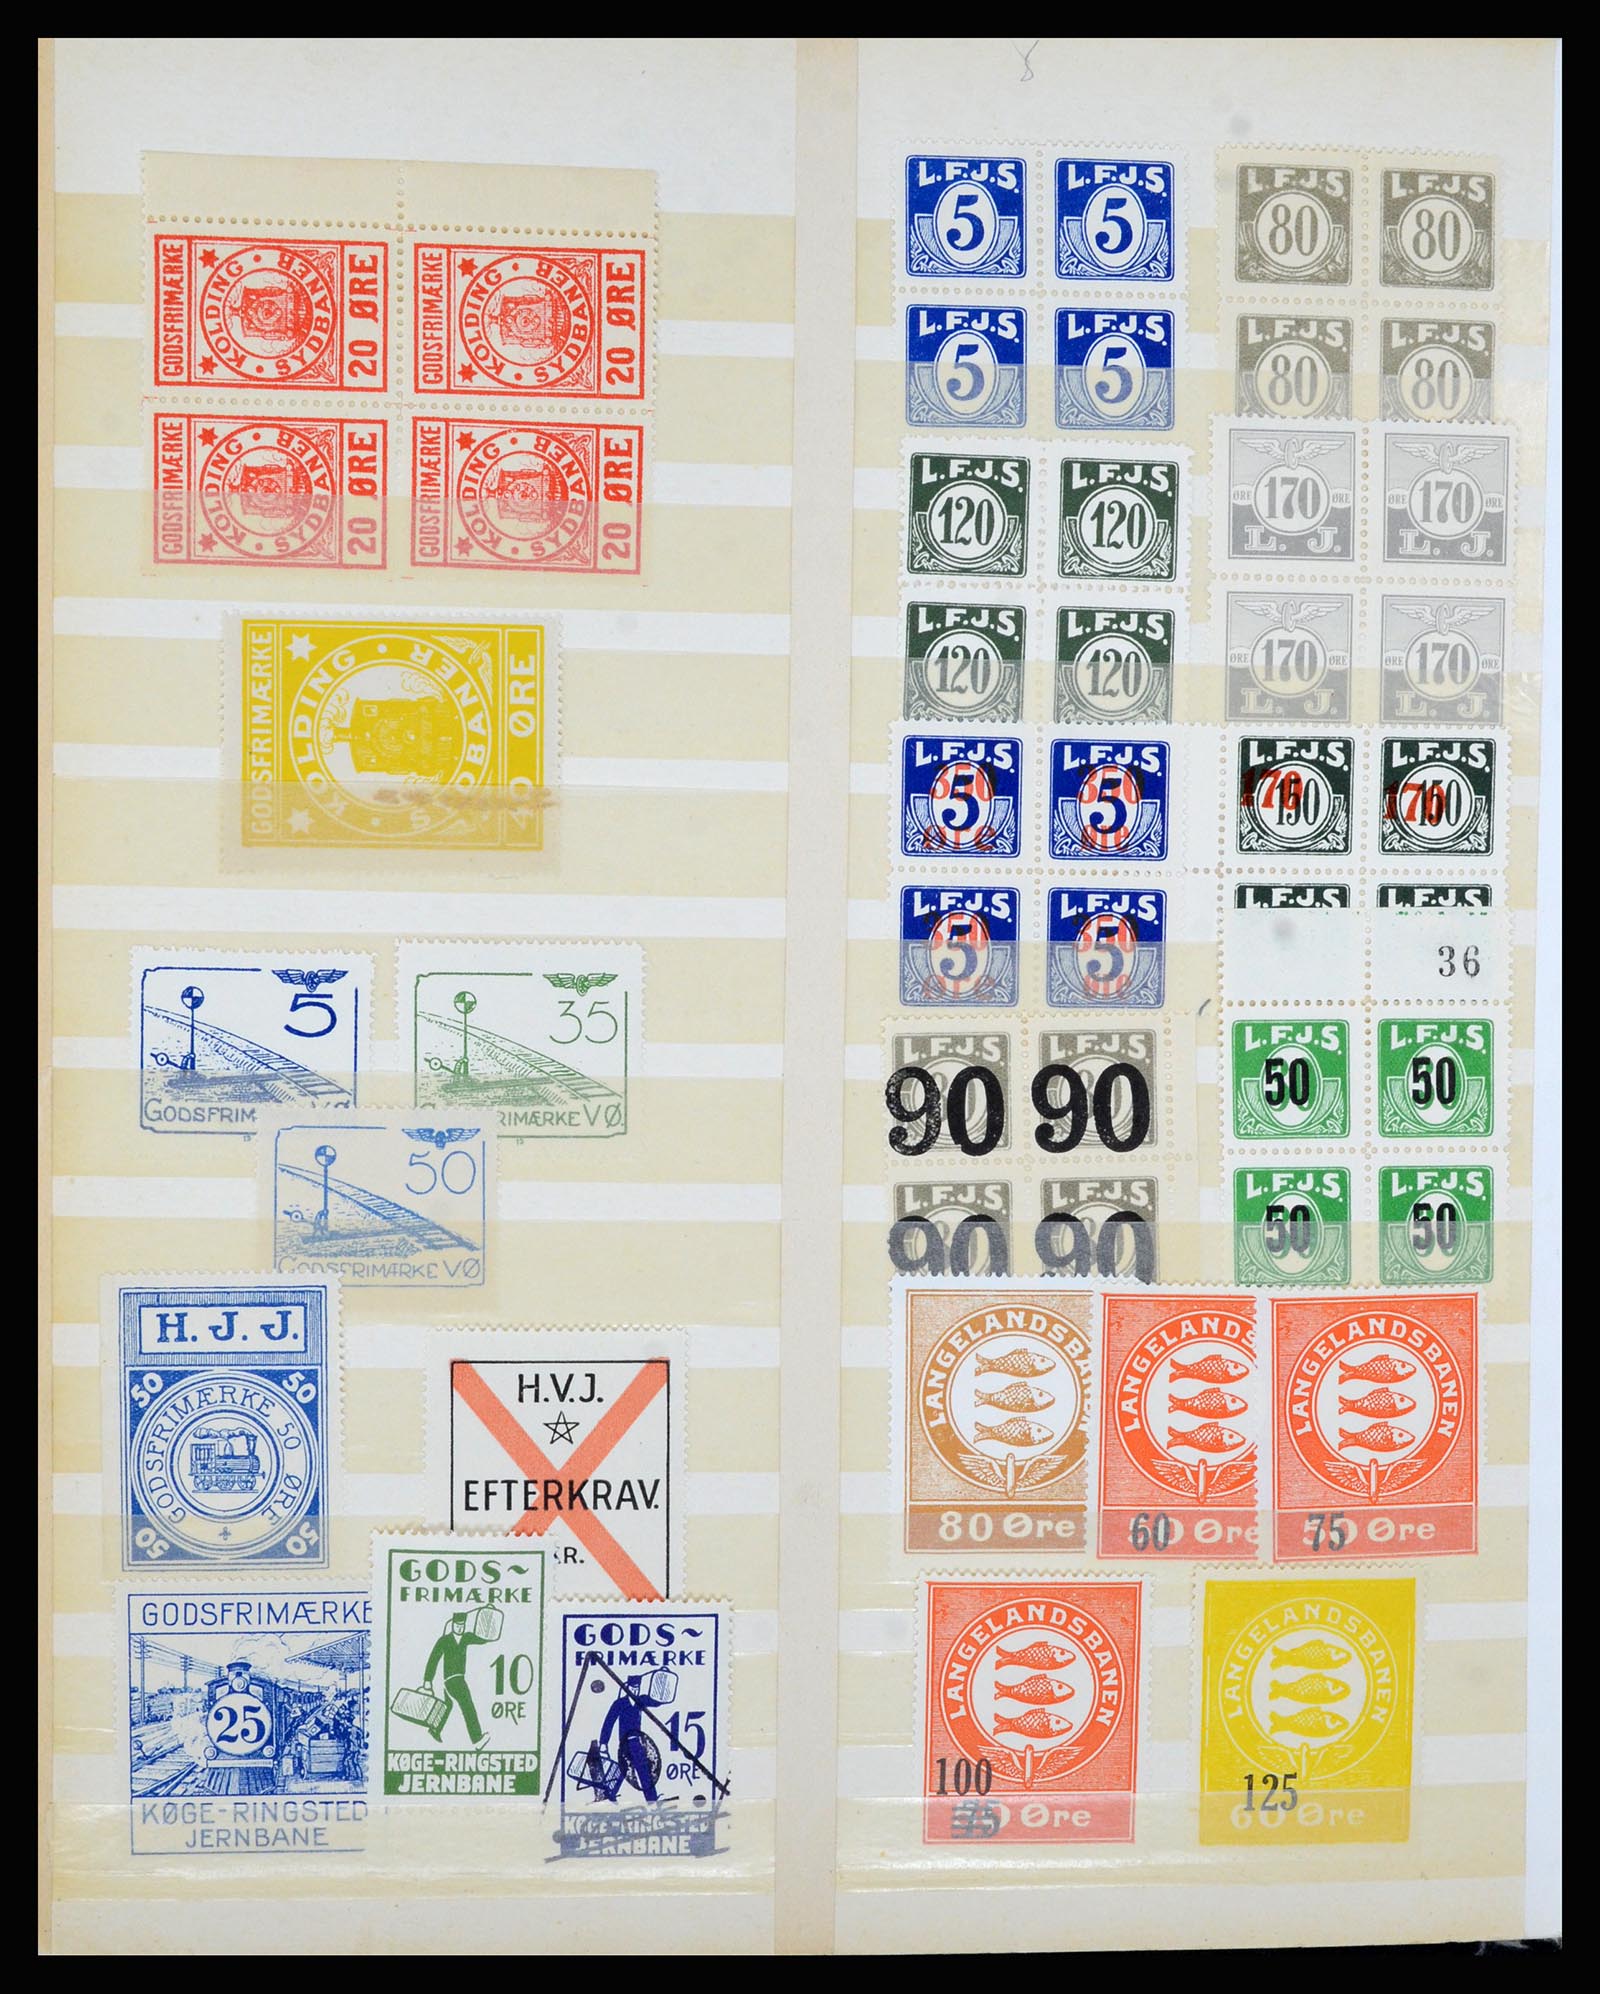 36767 012 - Stamp collection 36767 Denmark railroadstamps.